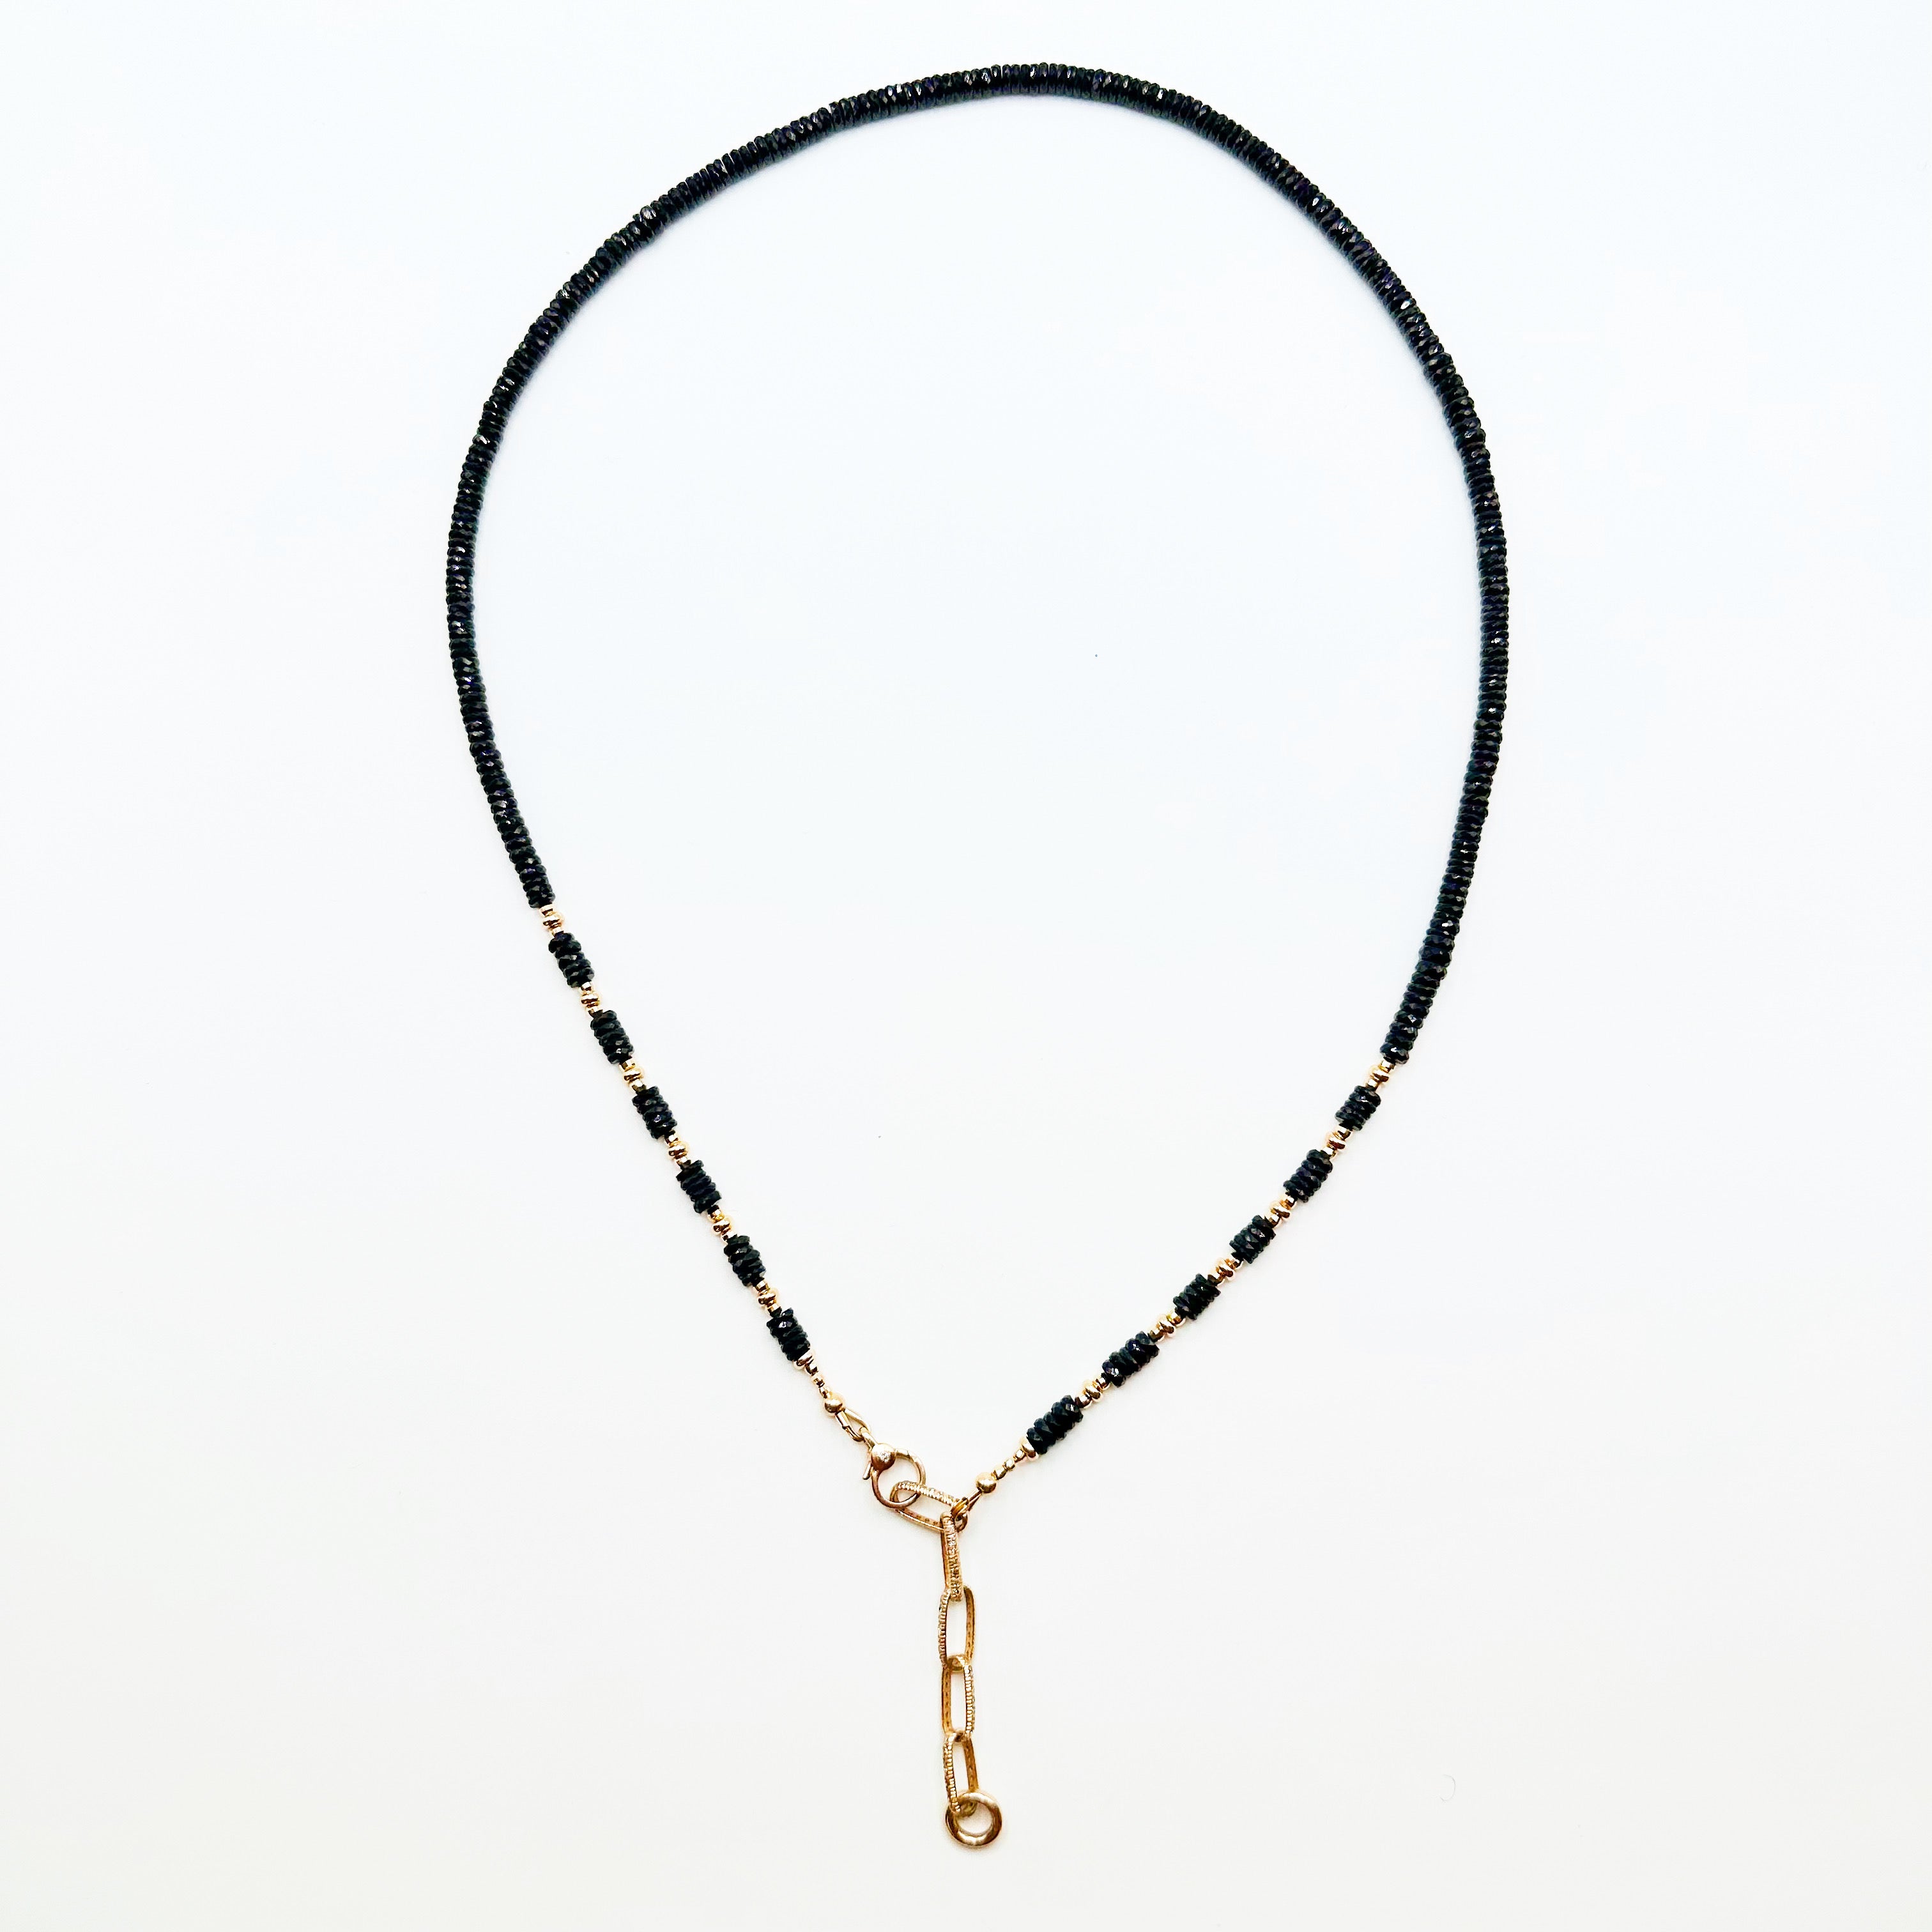 BLACK SPINEL GEMSTONE NECKLACE WITH 14k GOLD AND DIAMOND CHAIN